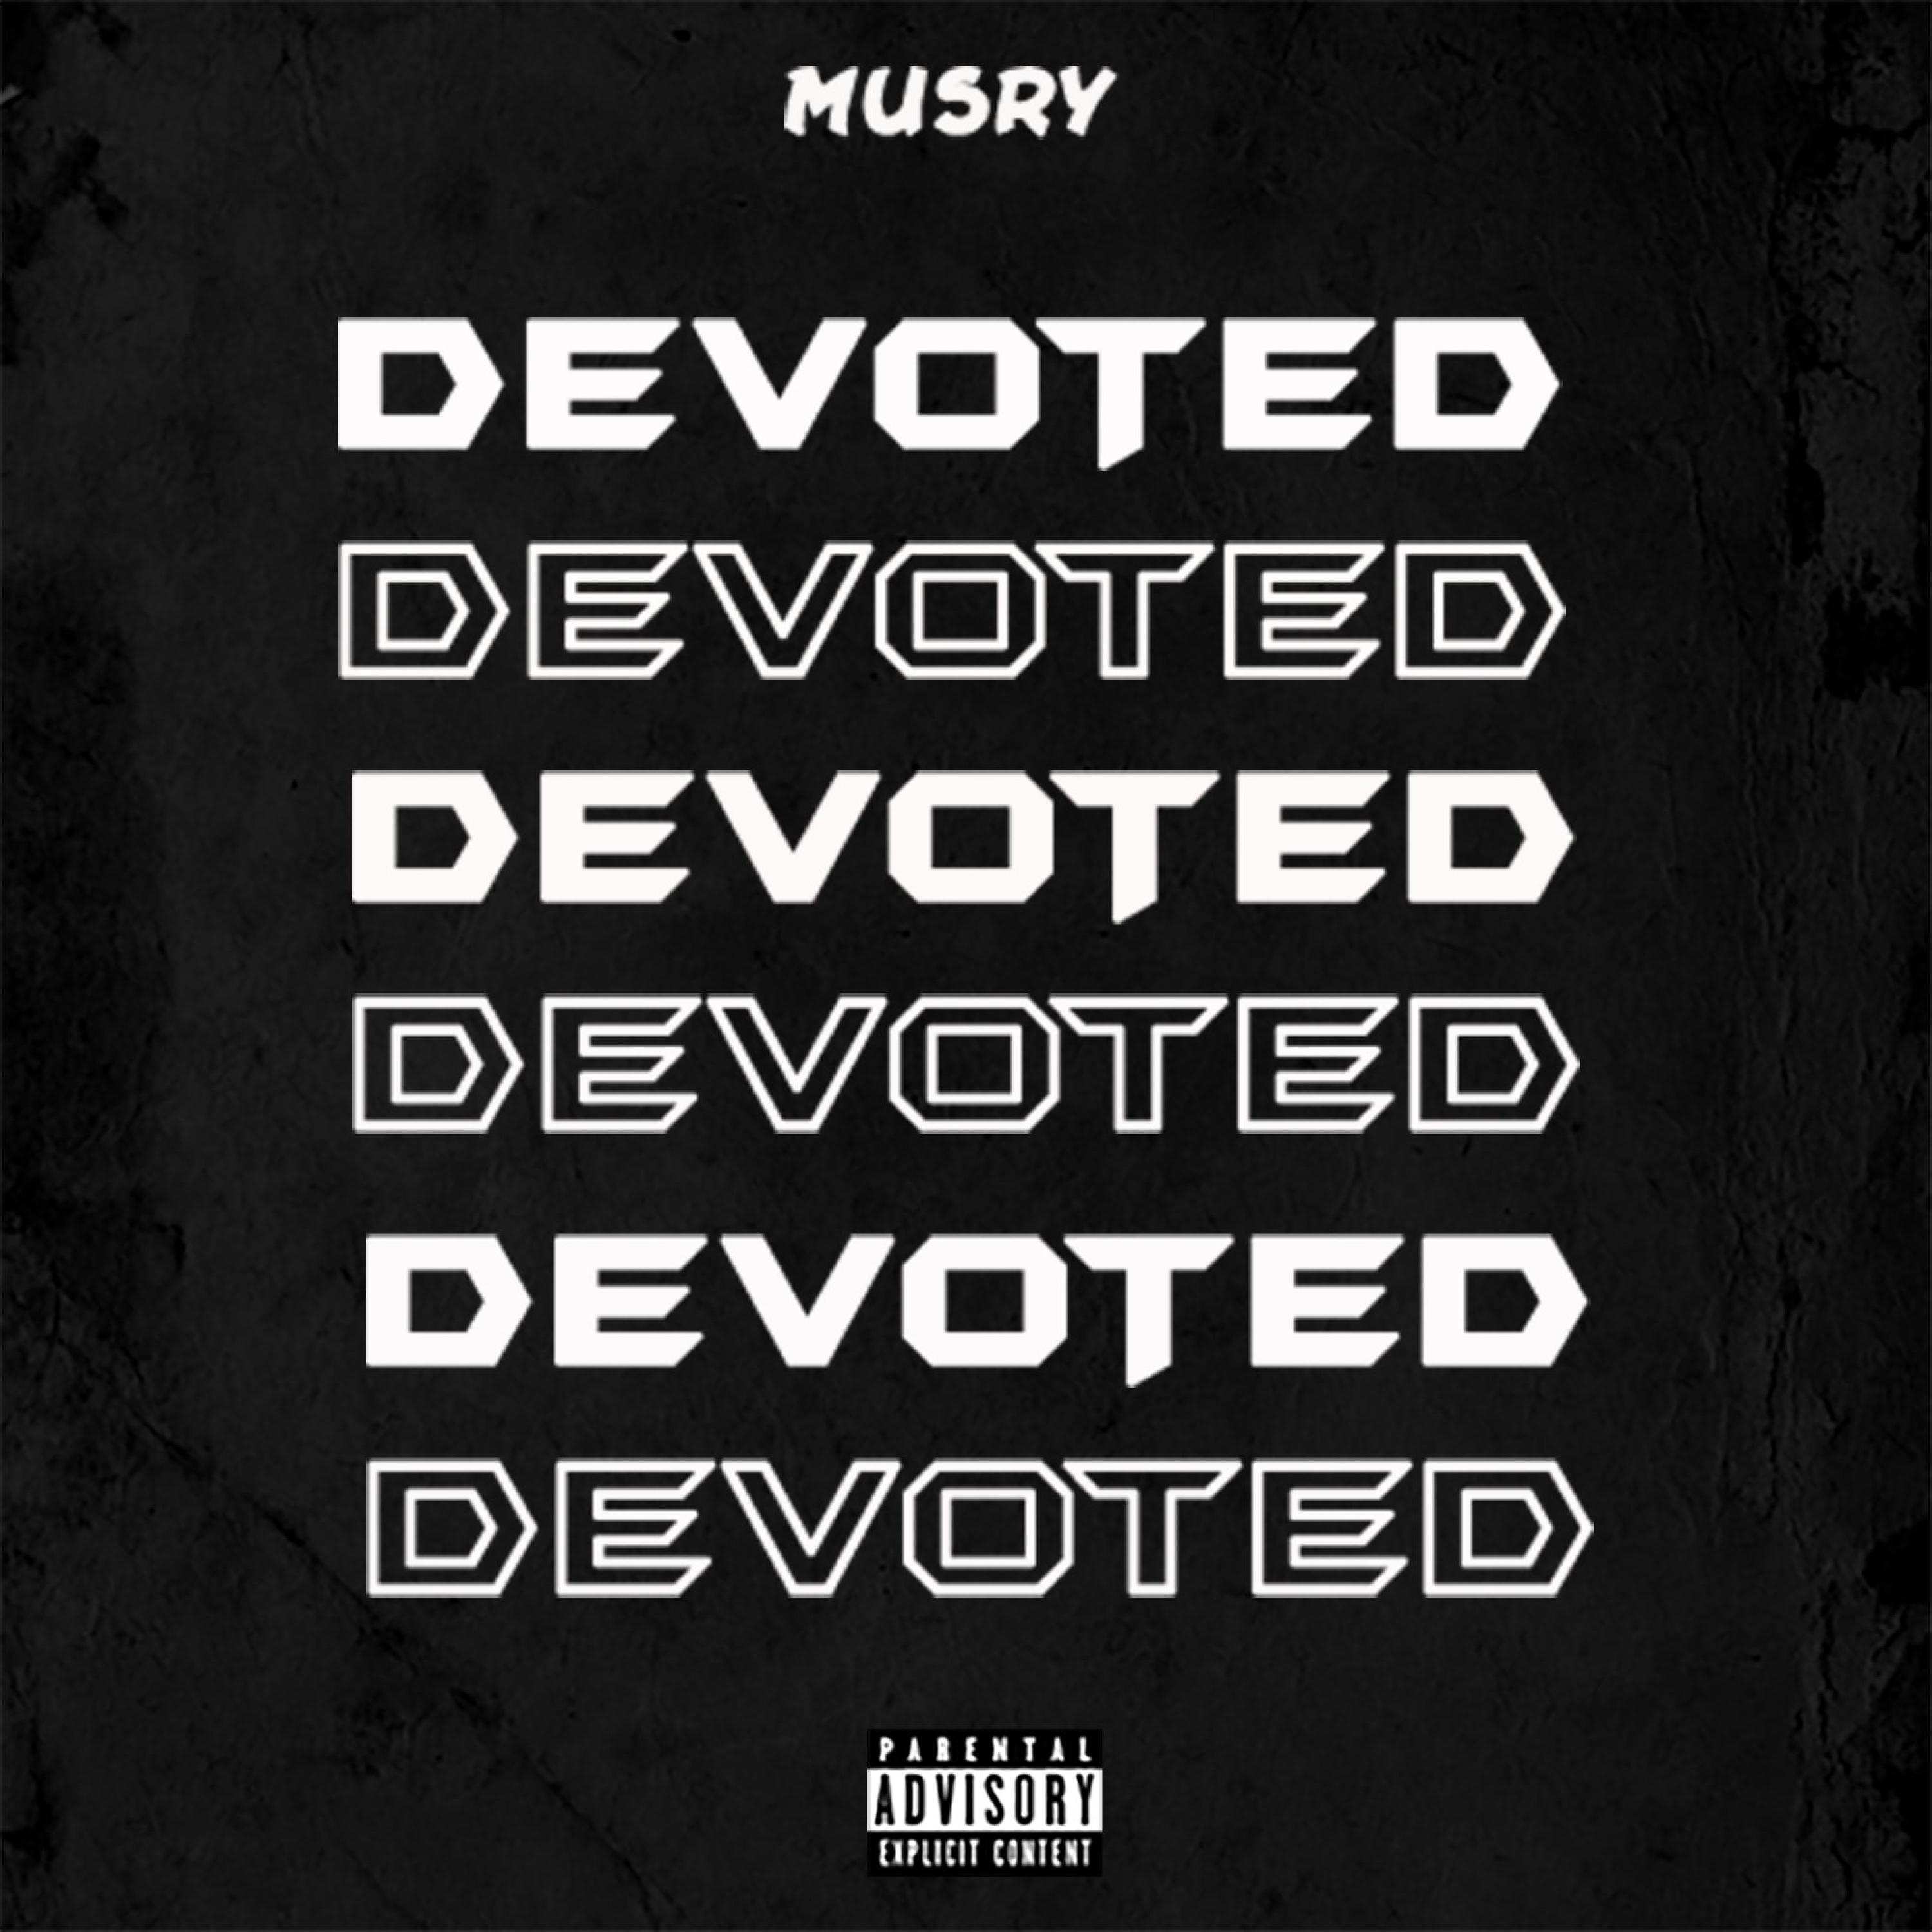 Image of Devoted by Musry